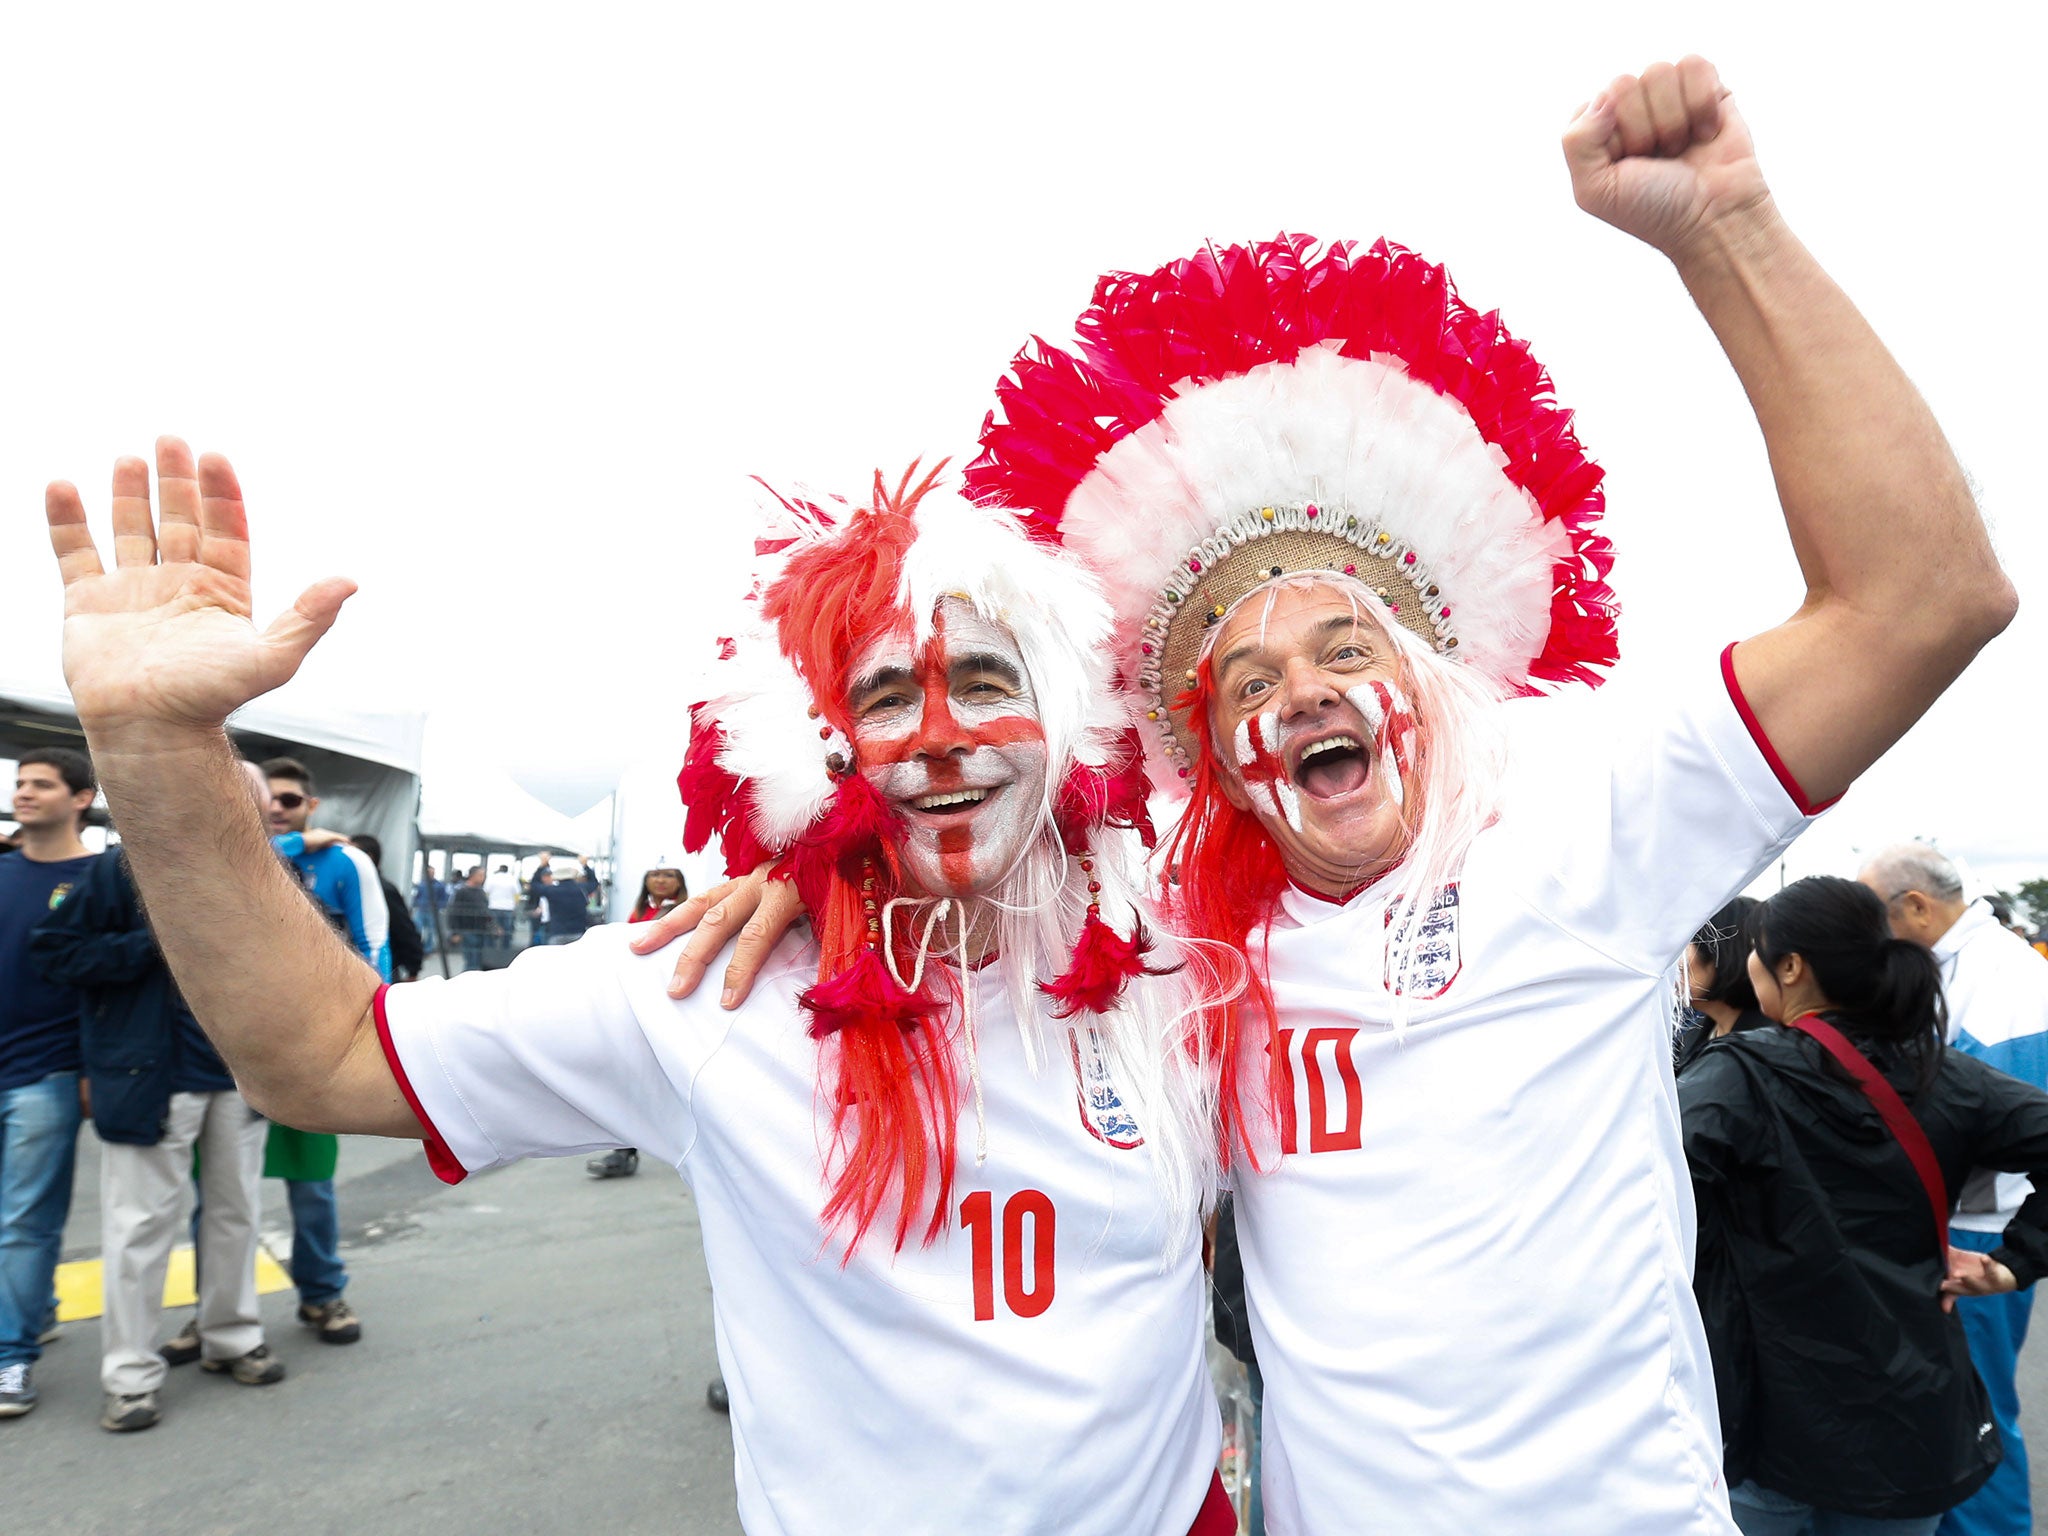 Fans of England arrive at Arena de Sao Paulo to watch the match between Uruguay and England for the 2014 FIFA World Cup on June 19, 2014 in Sao Paulo, Brazil.